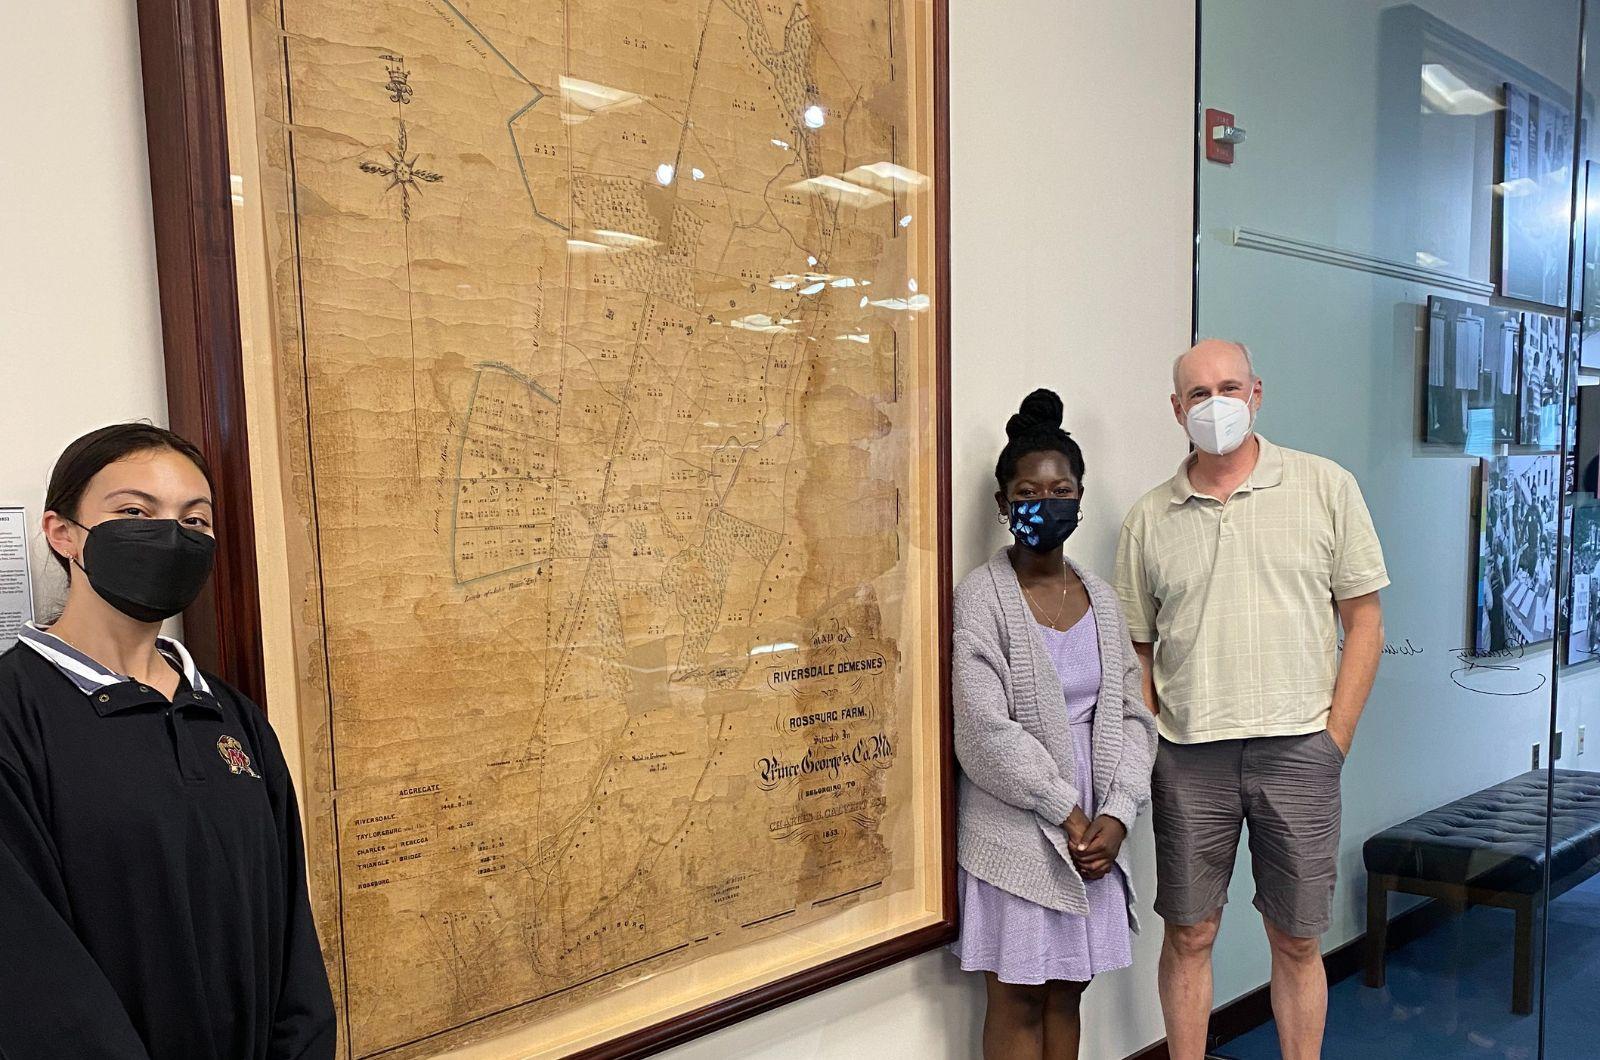 2022 SRI scholars and faculty mentor pose in front of historical map of Riversdale